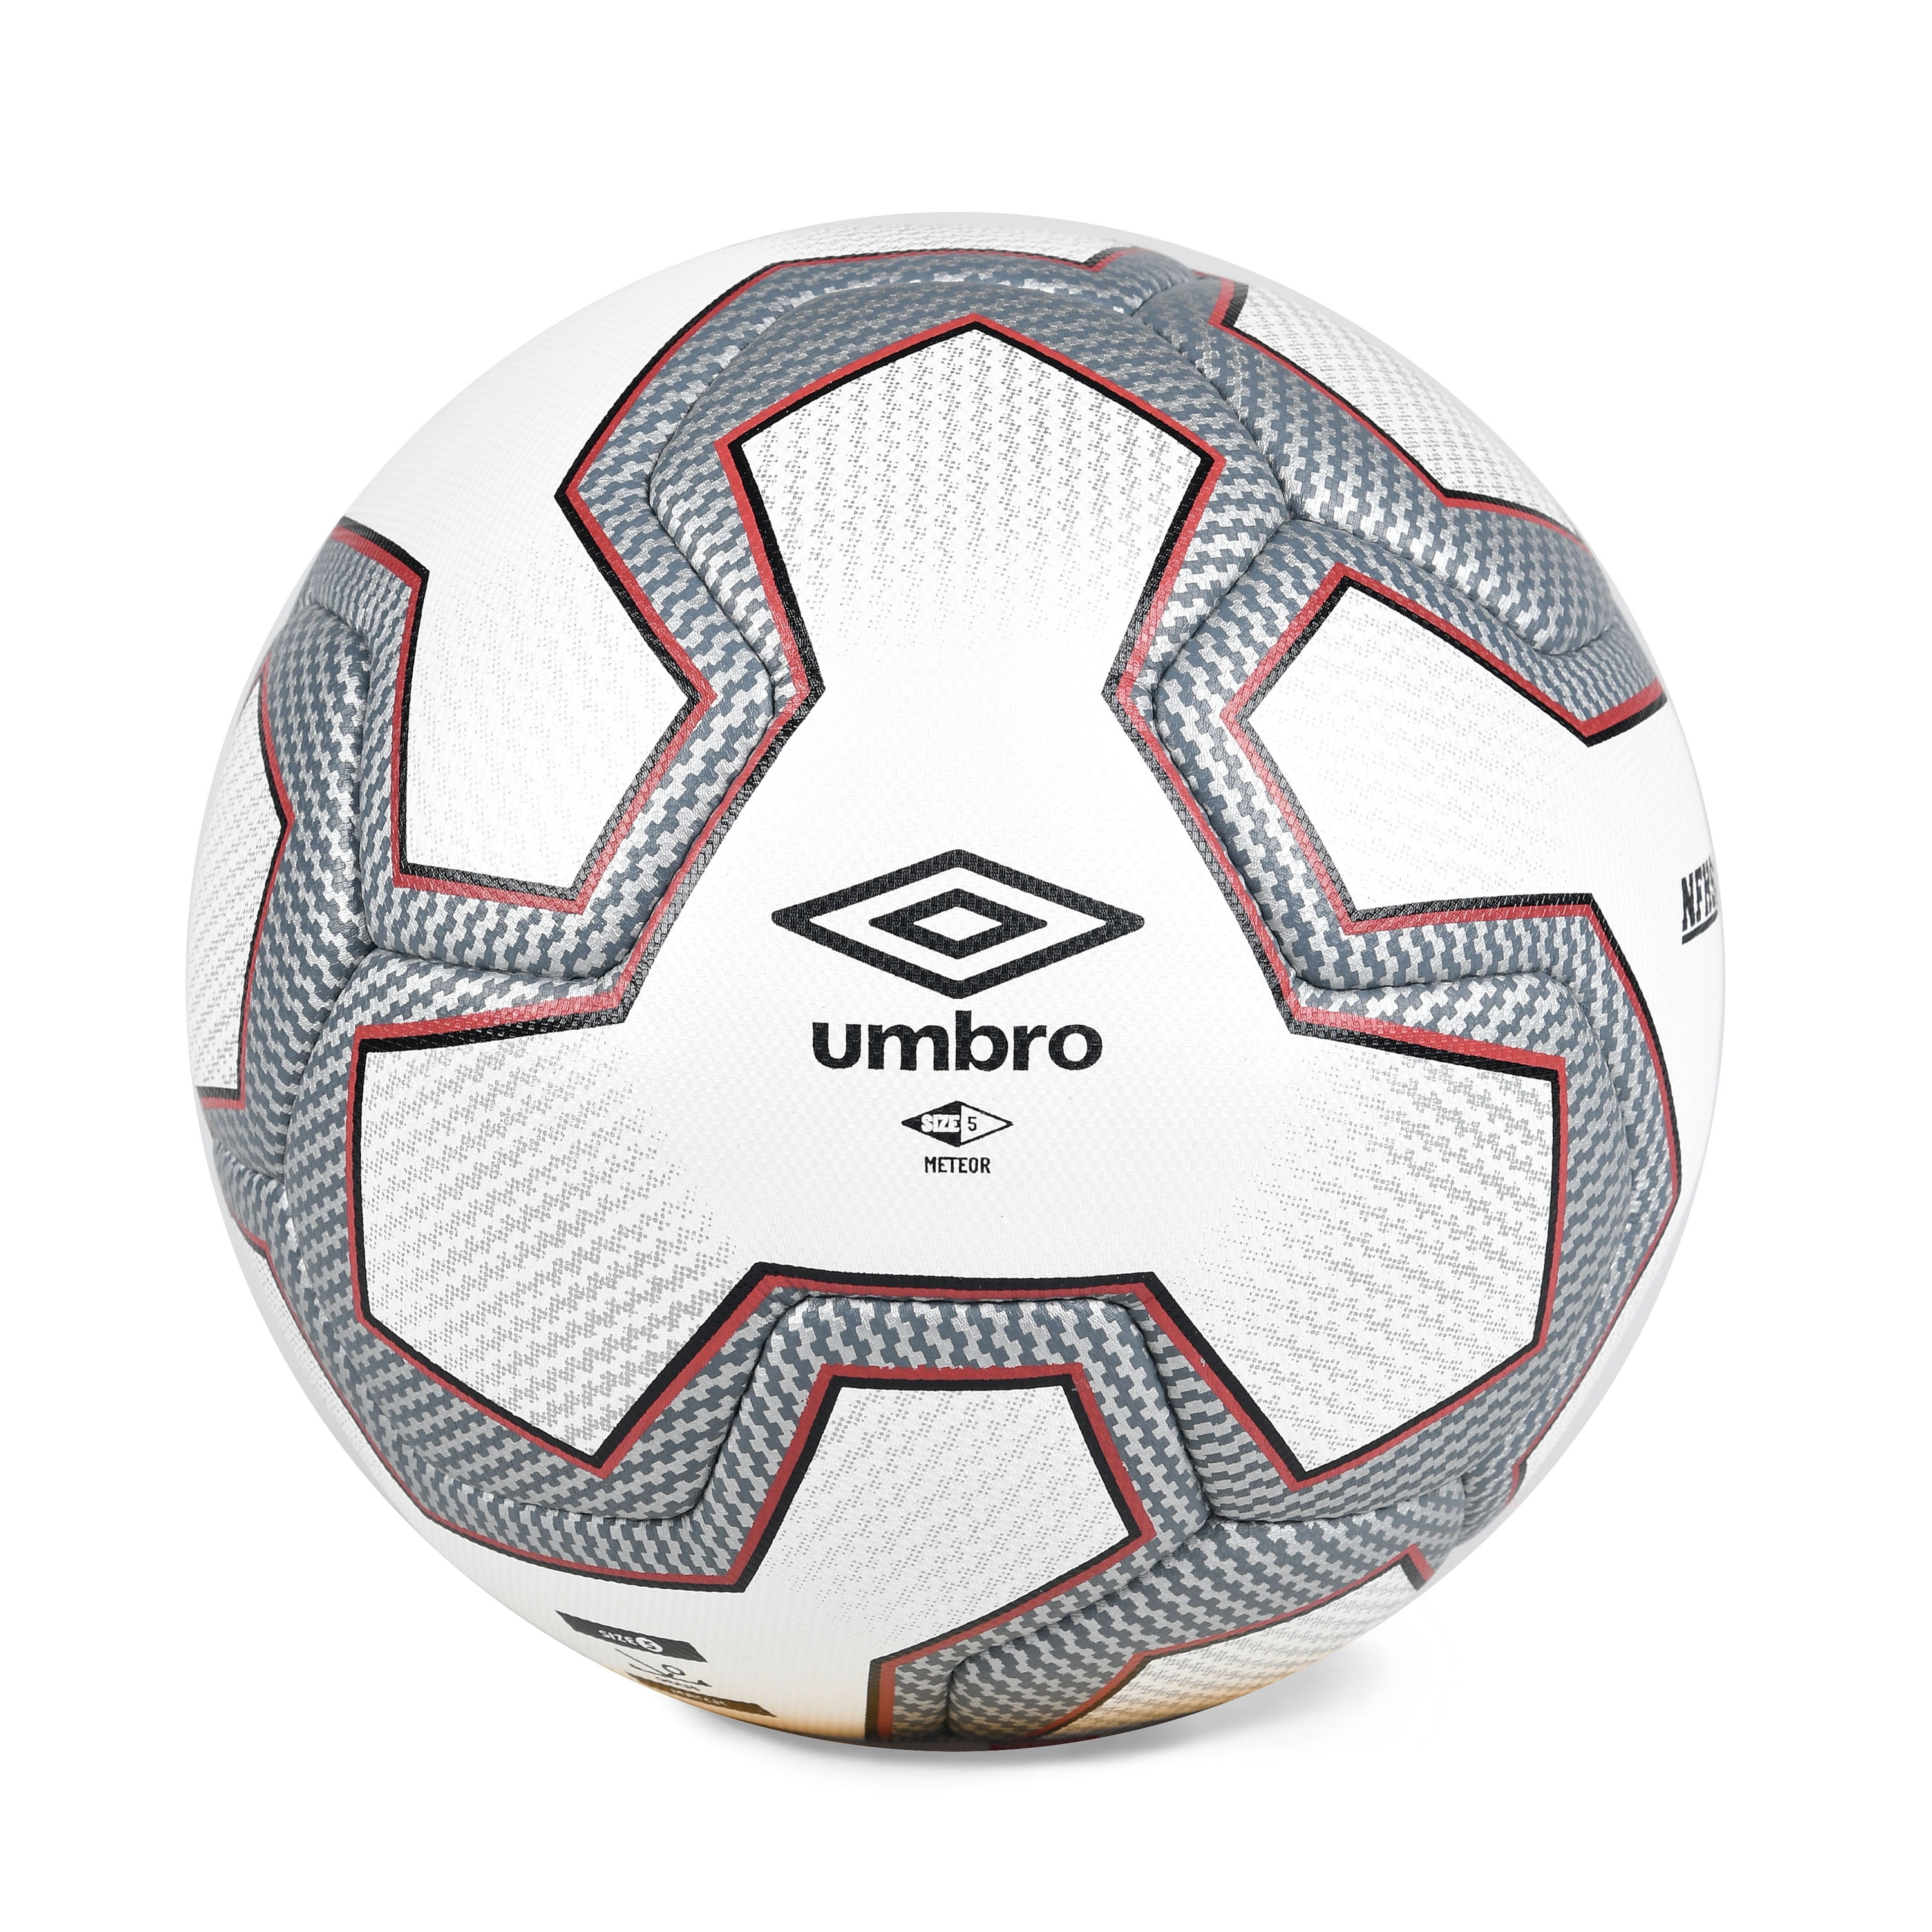 Wilson Traditional Soccer Ball Official Size 4 White-Black WTH8754 